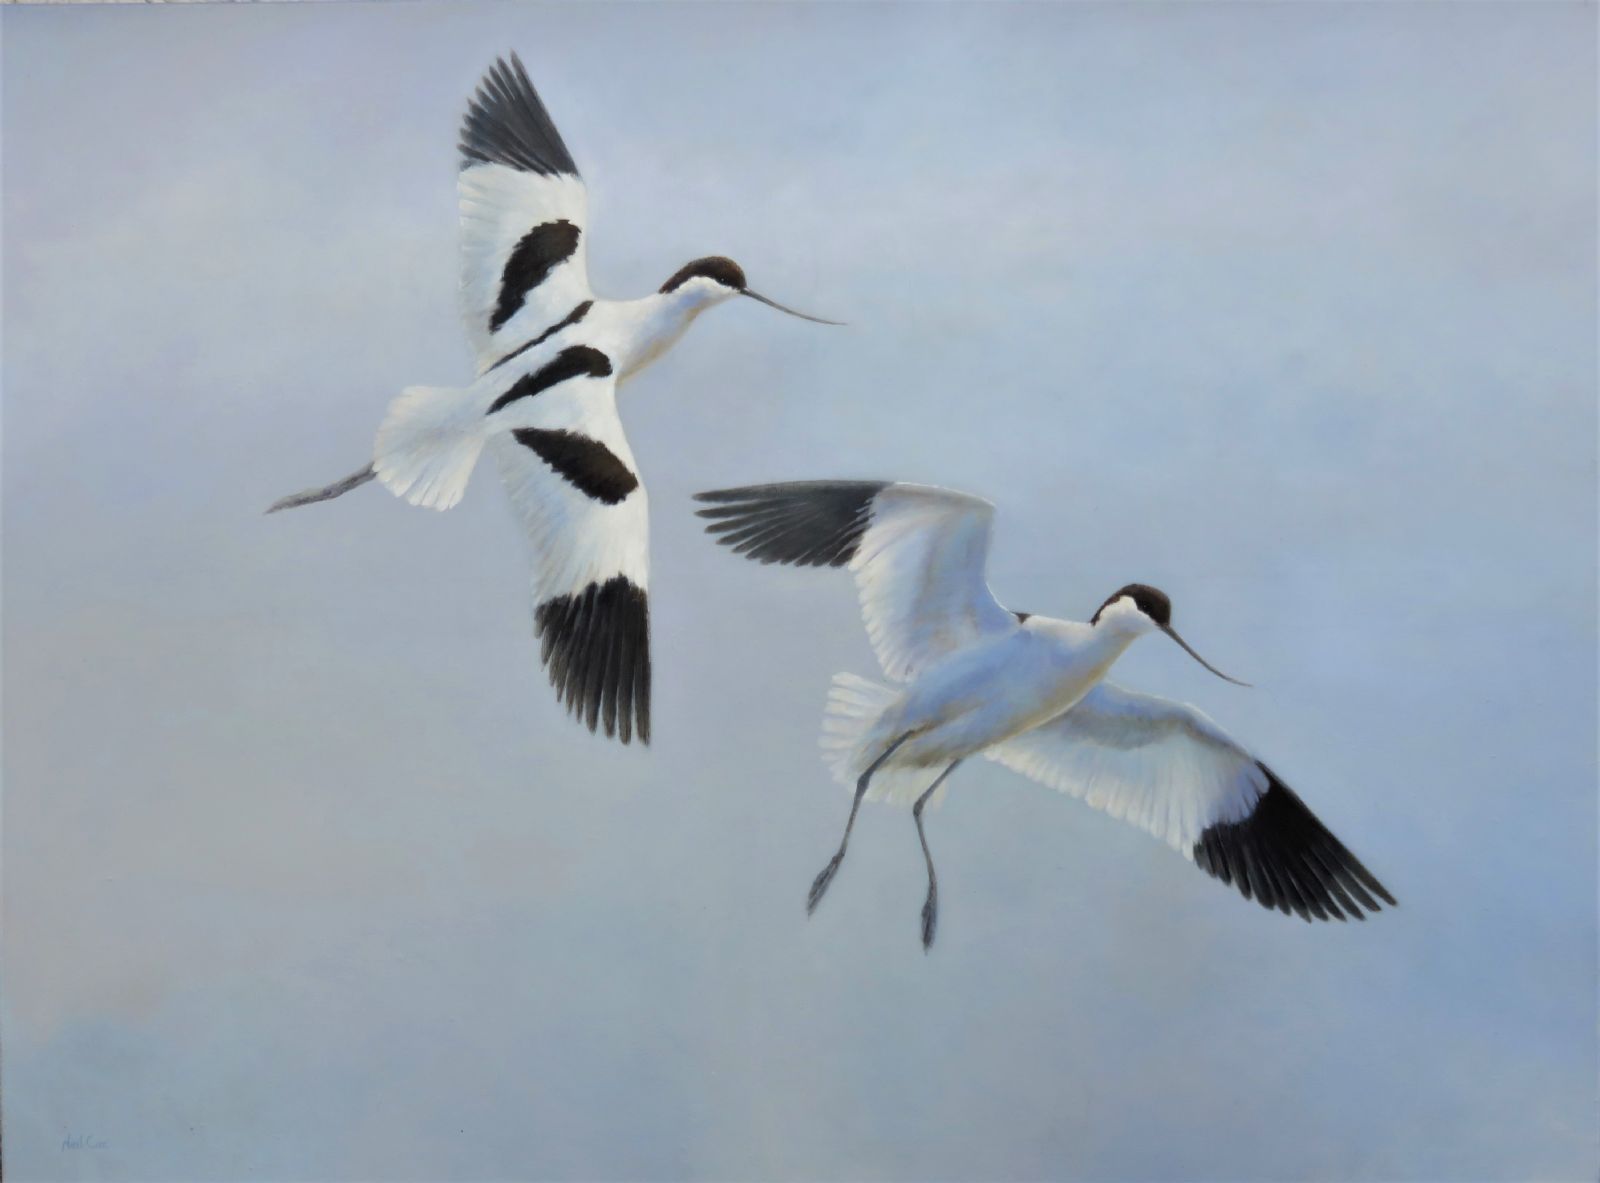 Neil Cox - Dropping In, Avocets Over the Exe